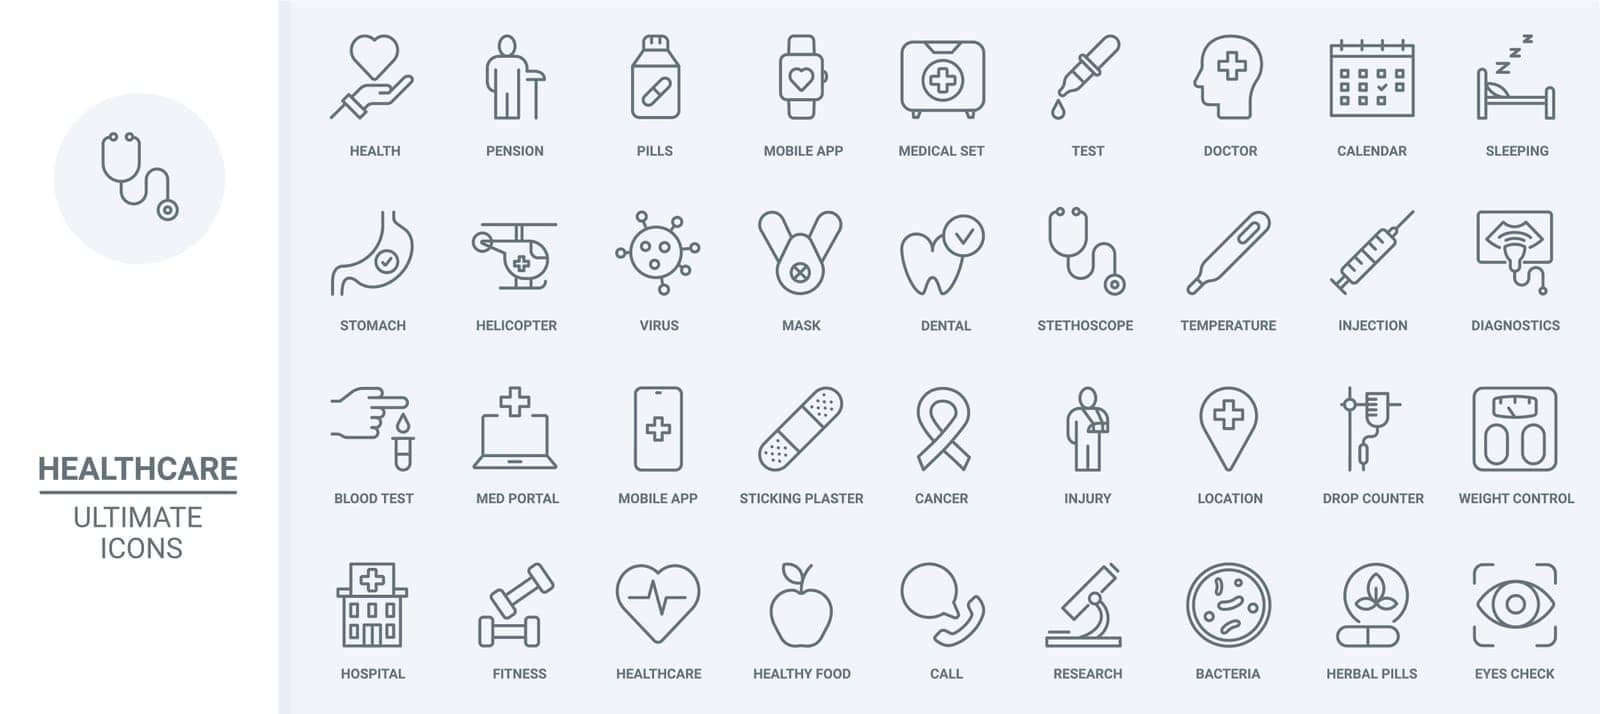 Healthcare, medicine thin line icons set vector illustration. Outline medical first aid, pills for cure and laboratory tests in hospital, diagnosis and dental care symbols for health mobile app